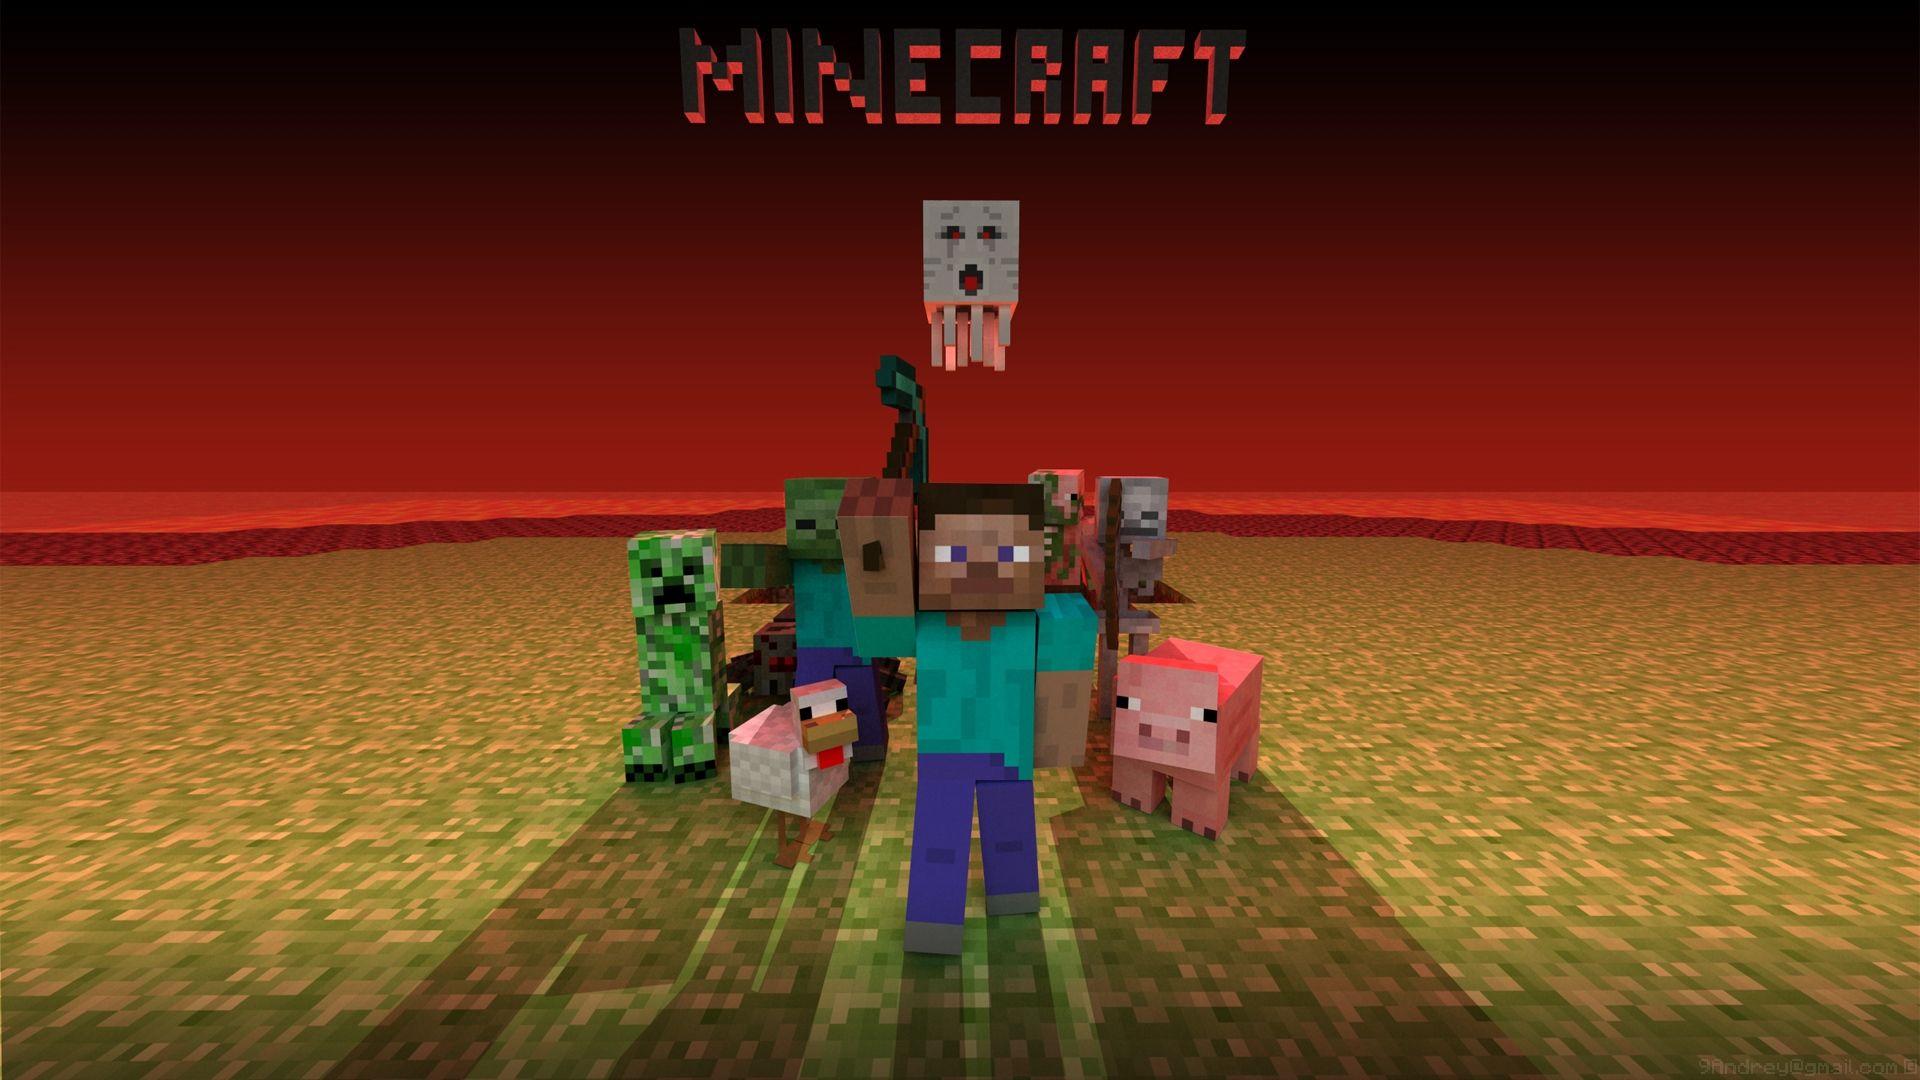 Download wallpaper 1920x1080 minecraft, mobs, creeper, snake, zombie